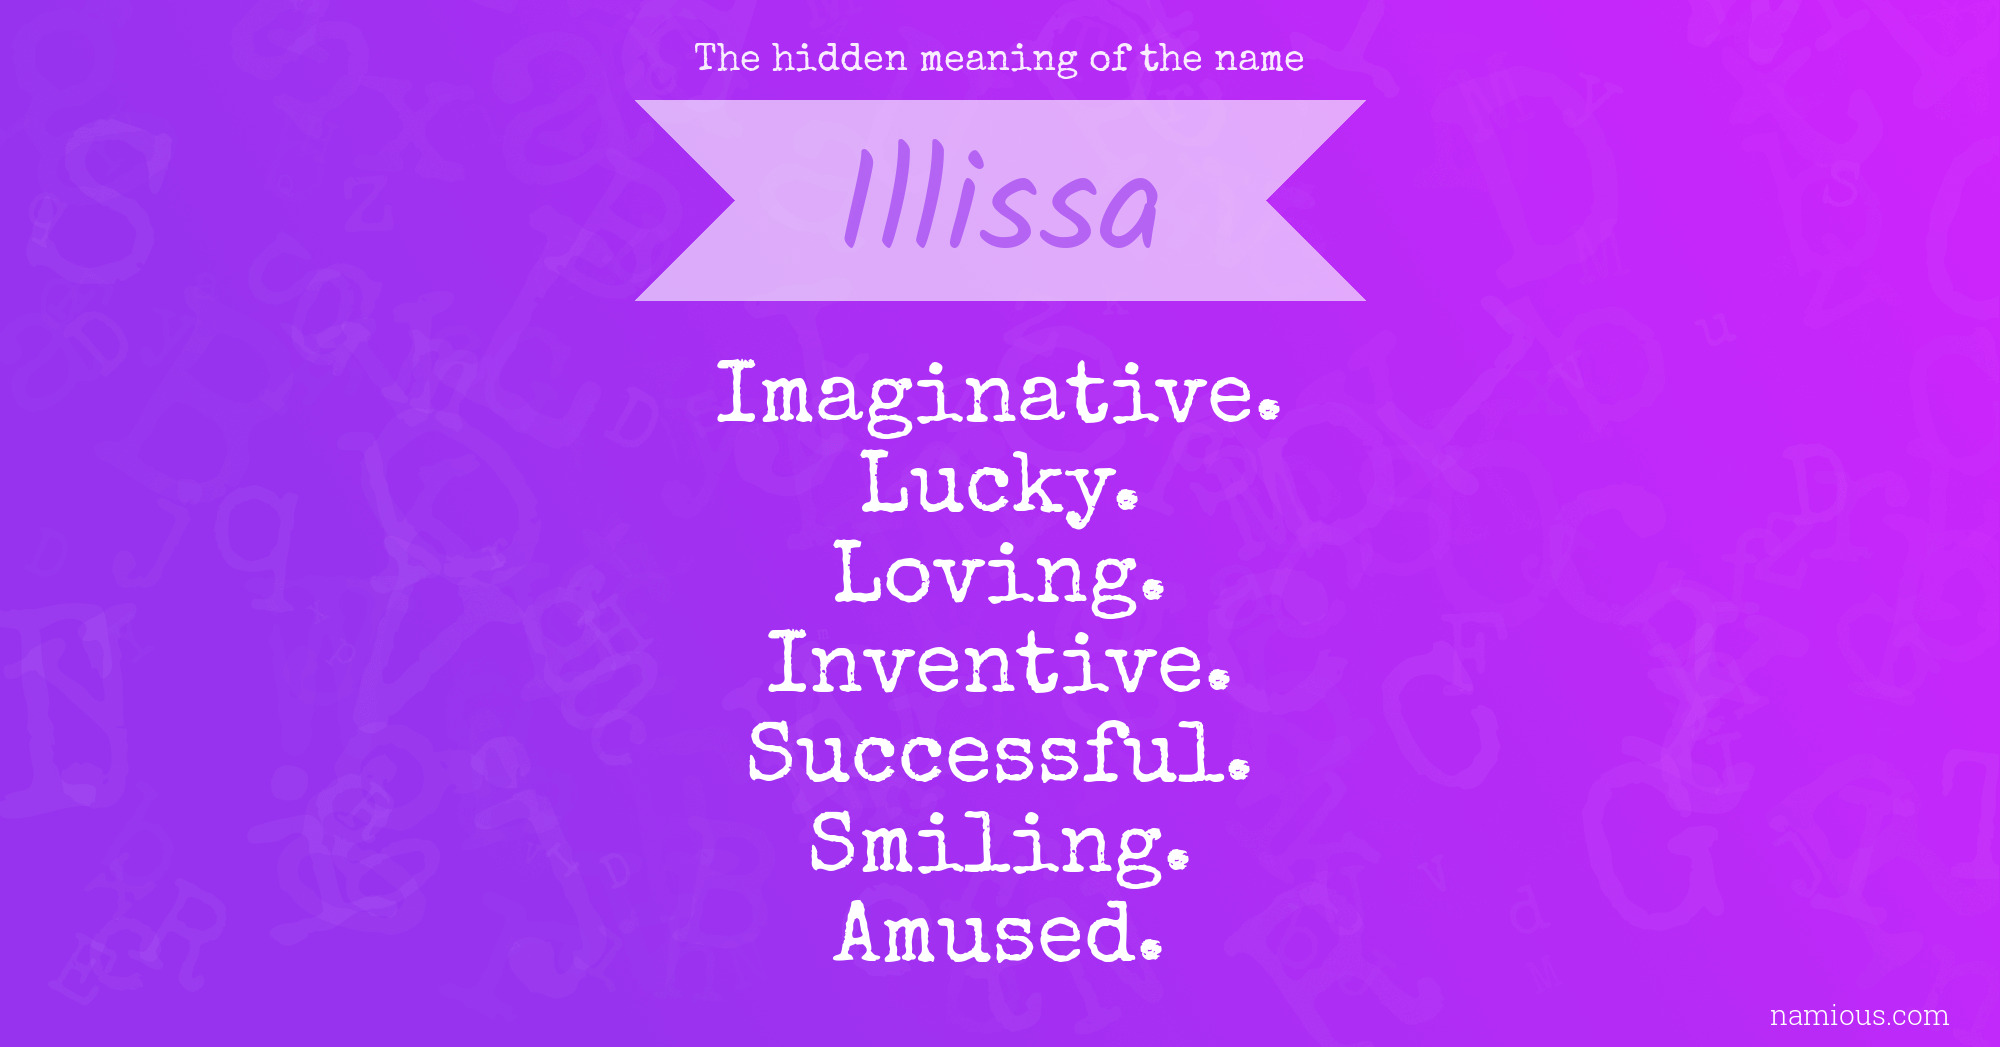 The hidden meaning of the name Illissa